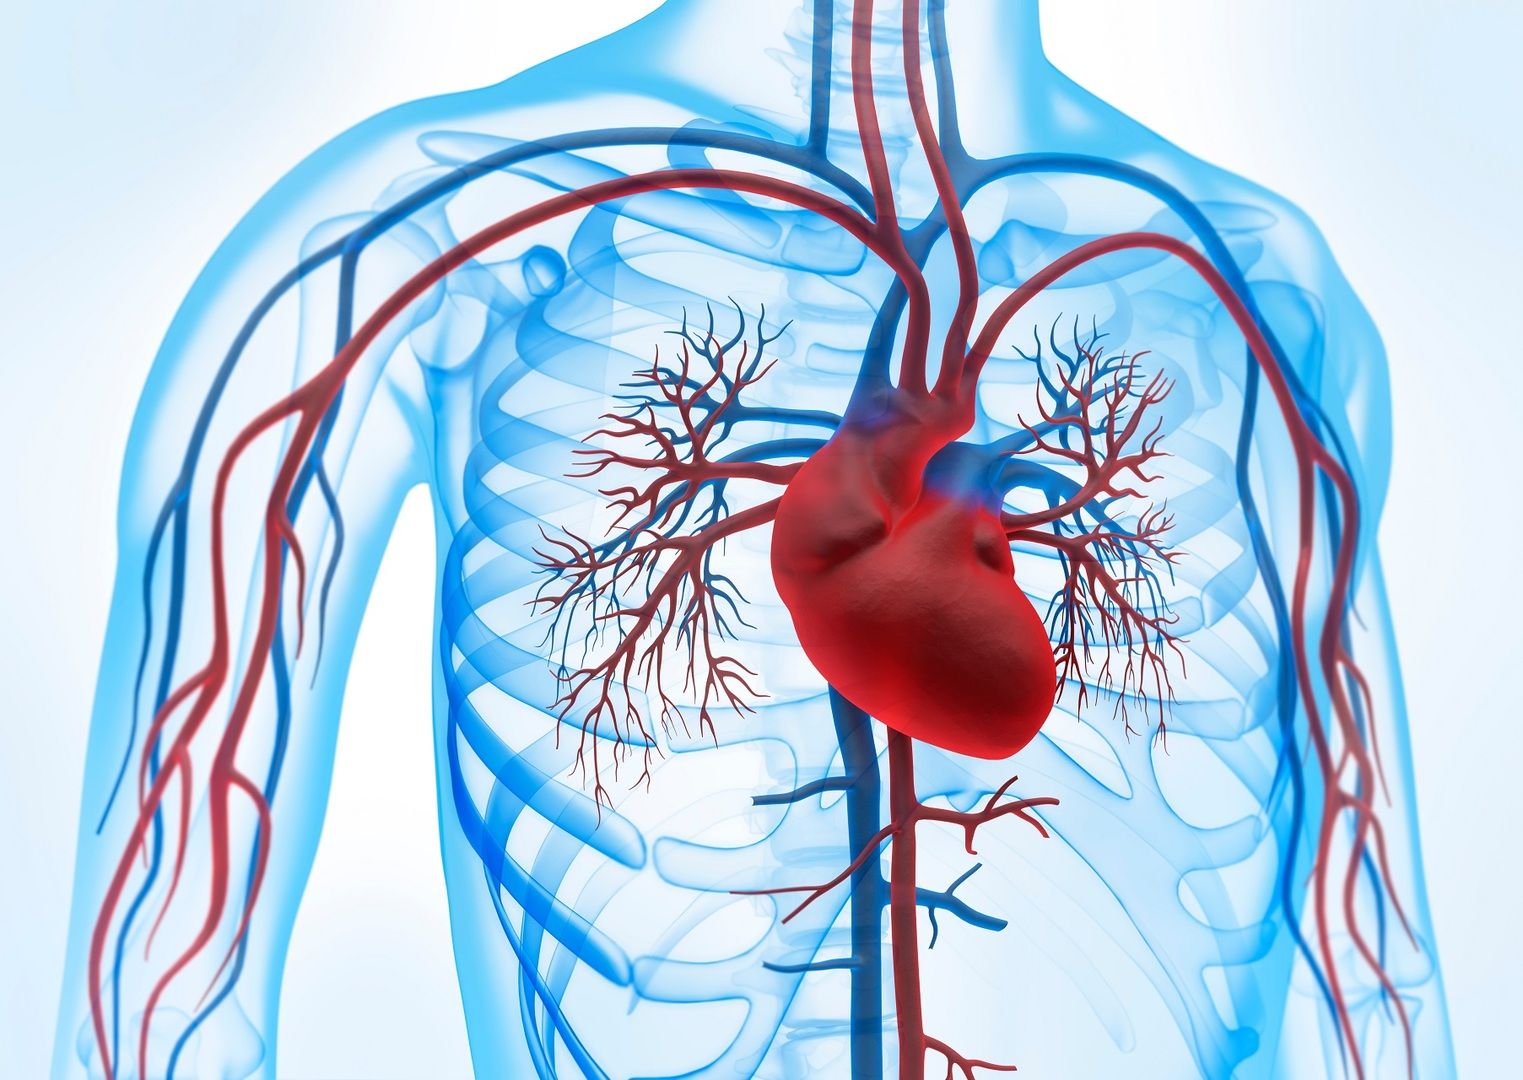 Blood circulation and heart illustration - Our cardiovascular system is essential for our health. But how can we prevent disease?